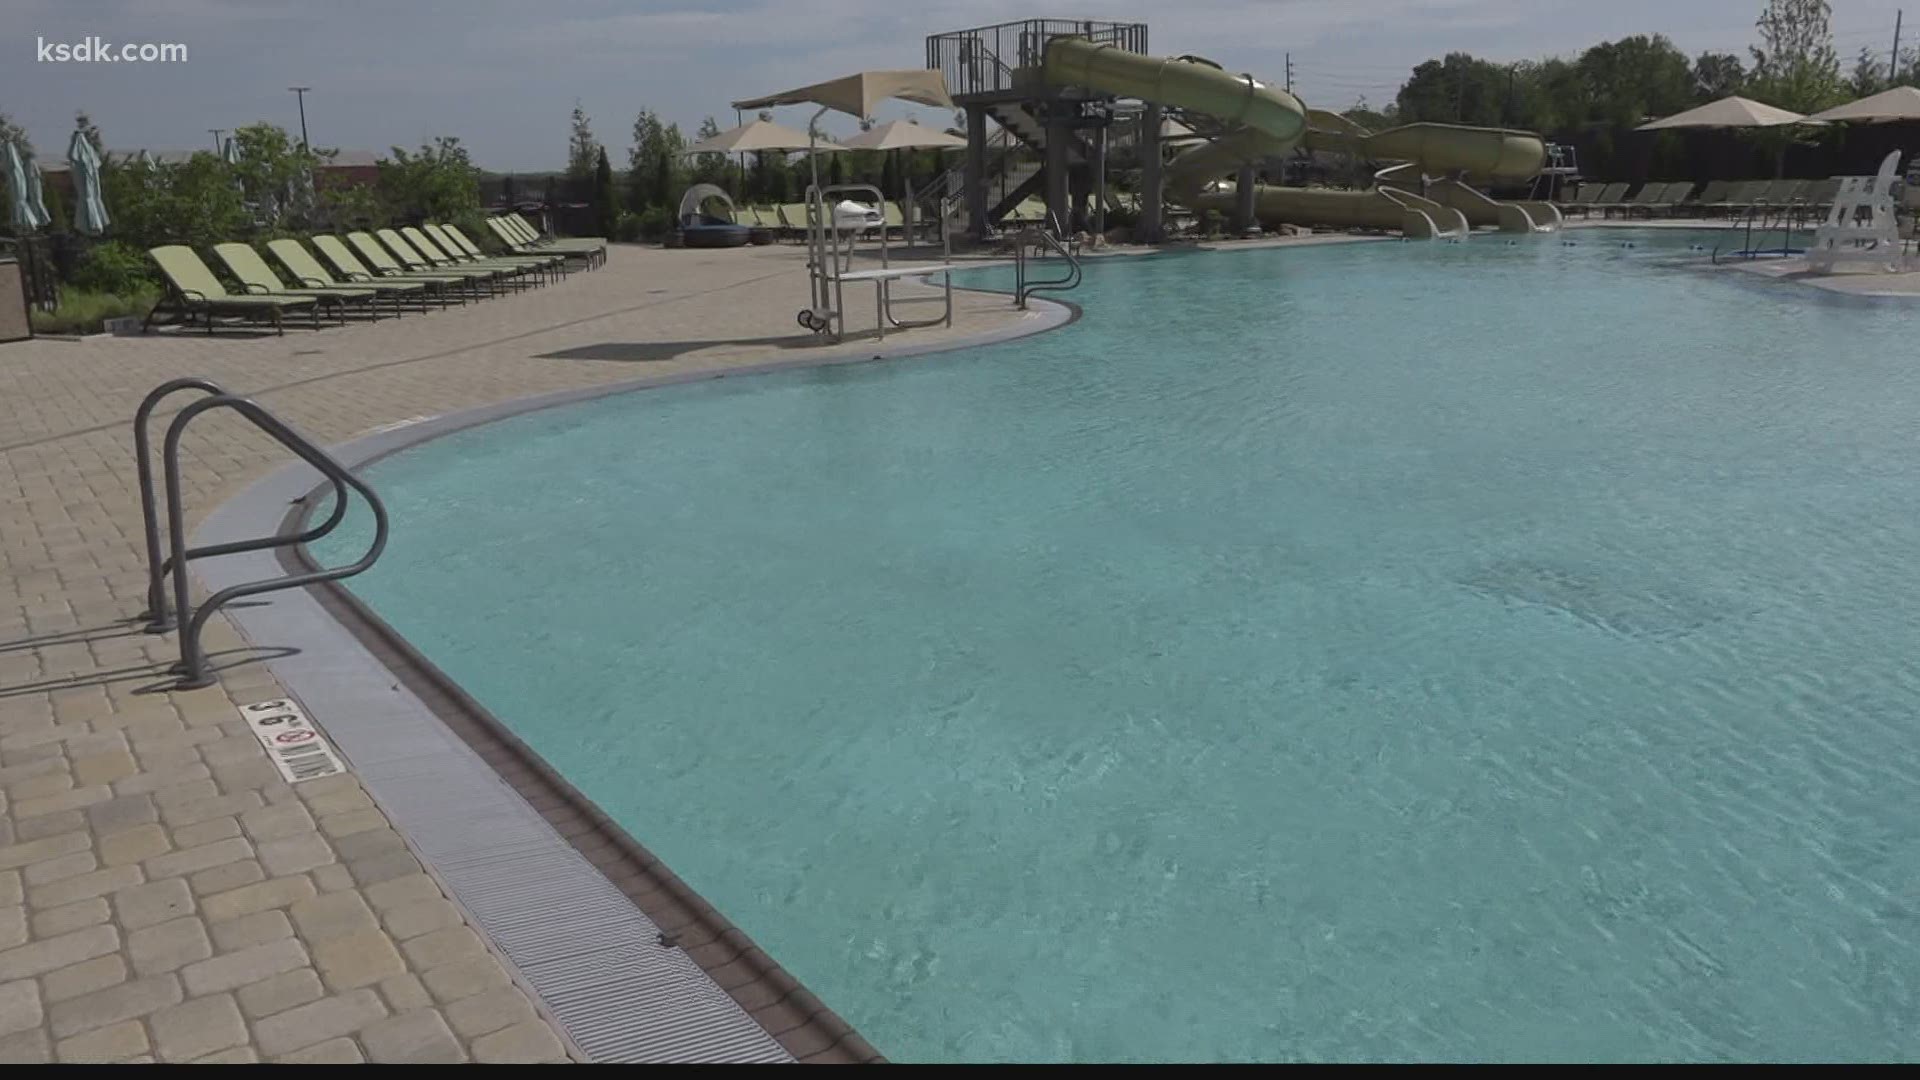 Pay for lifeguards is going up, benefits and signing bonuses are being offered to help staff area pools.